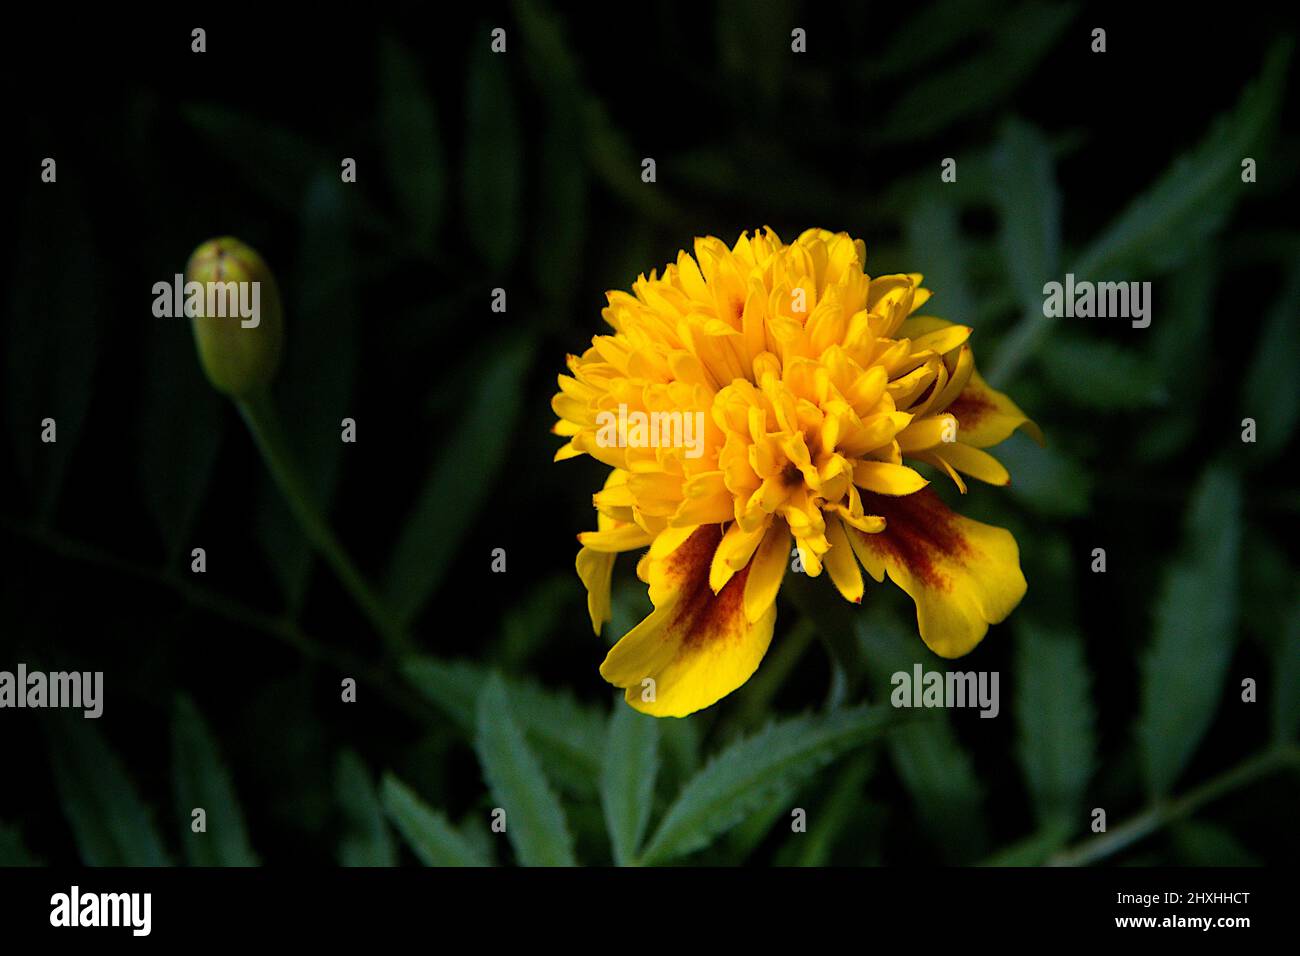 View of Tiger-Eyes Marigold flower and bud against dark green background Stock Photo